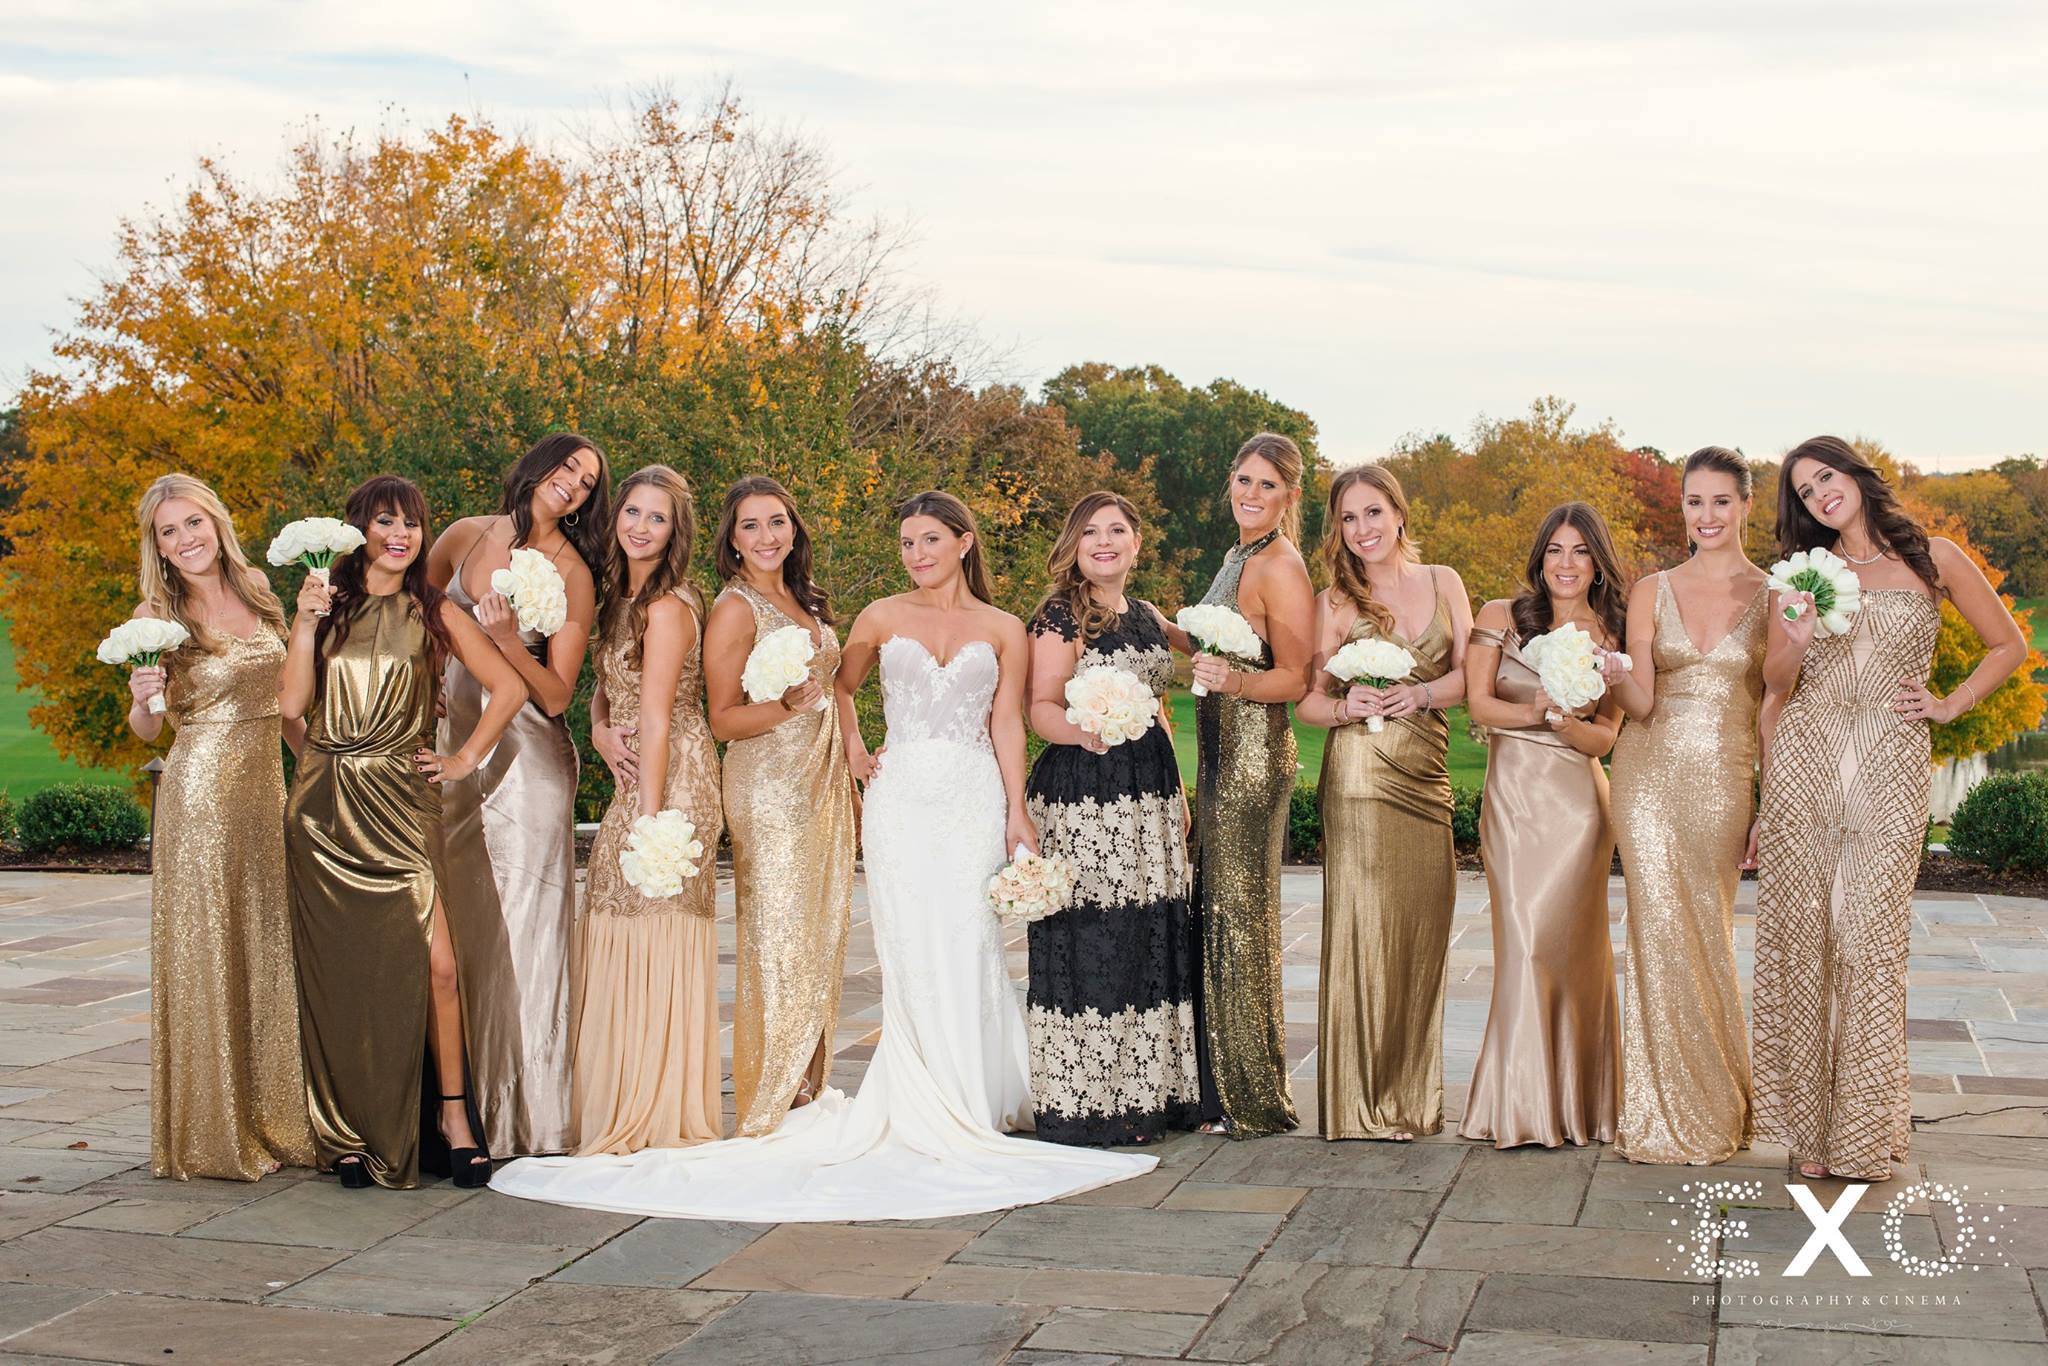 bride wearing kleinfeld bridal gown and bridesmaids wearing a variety of dresses